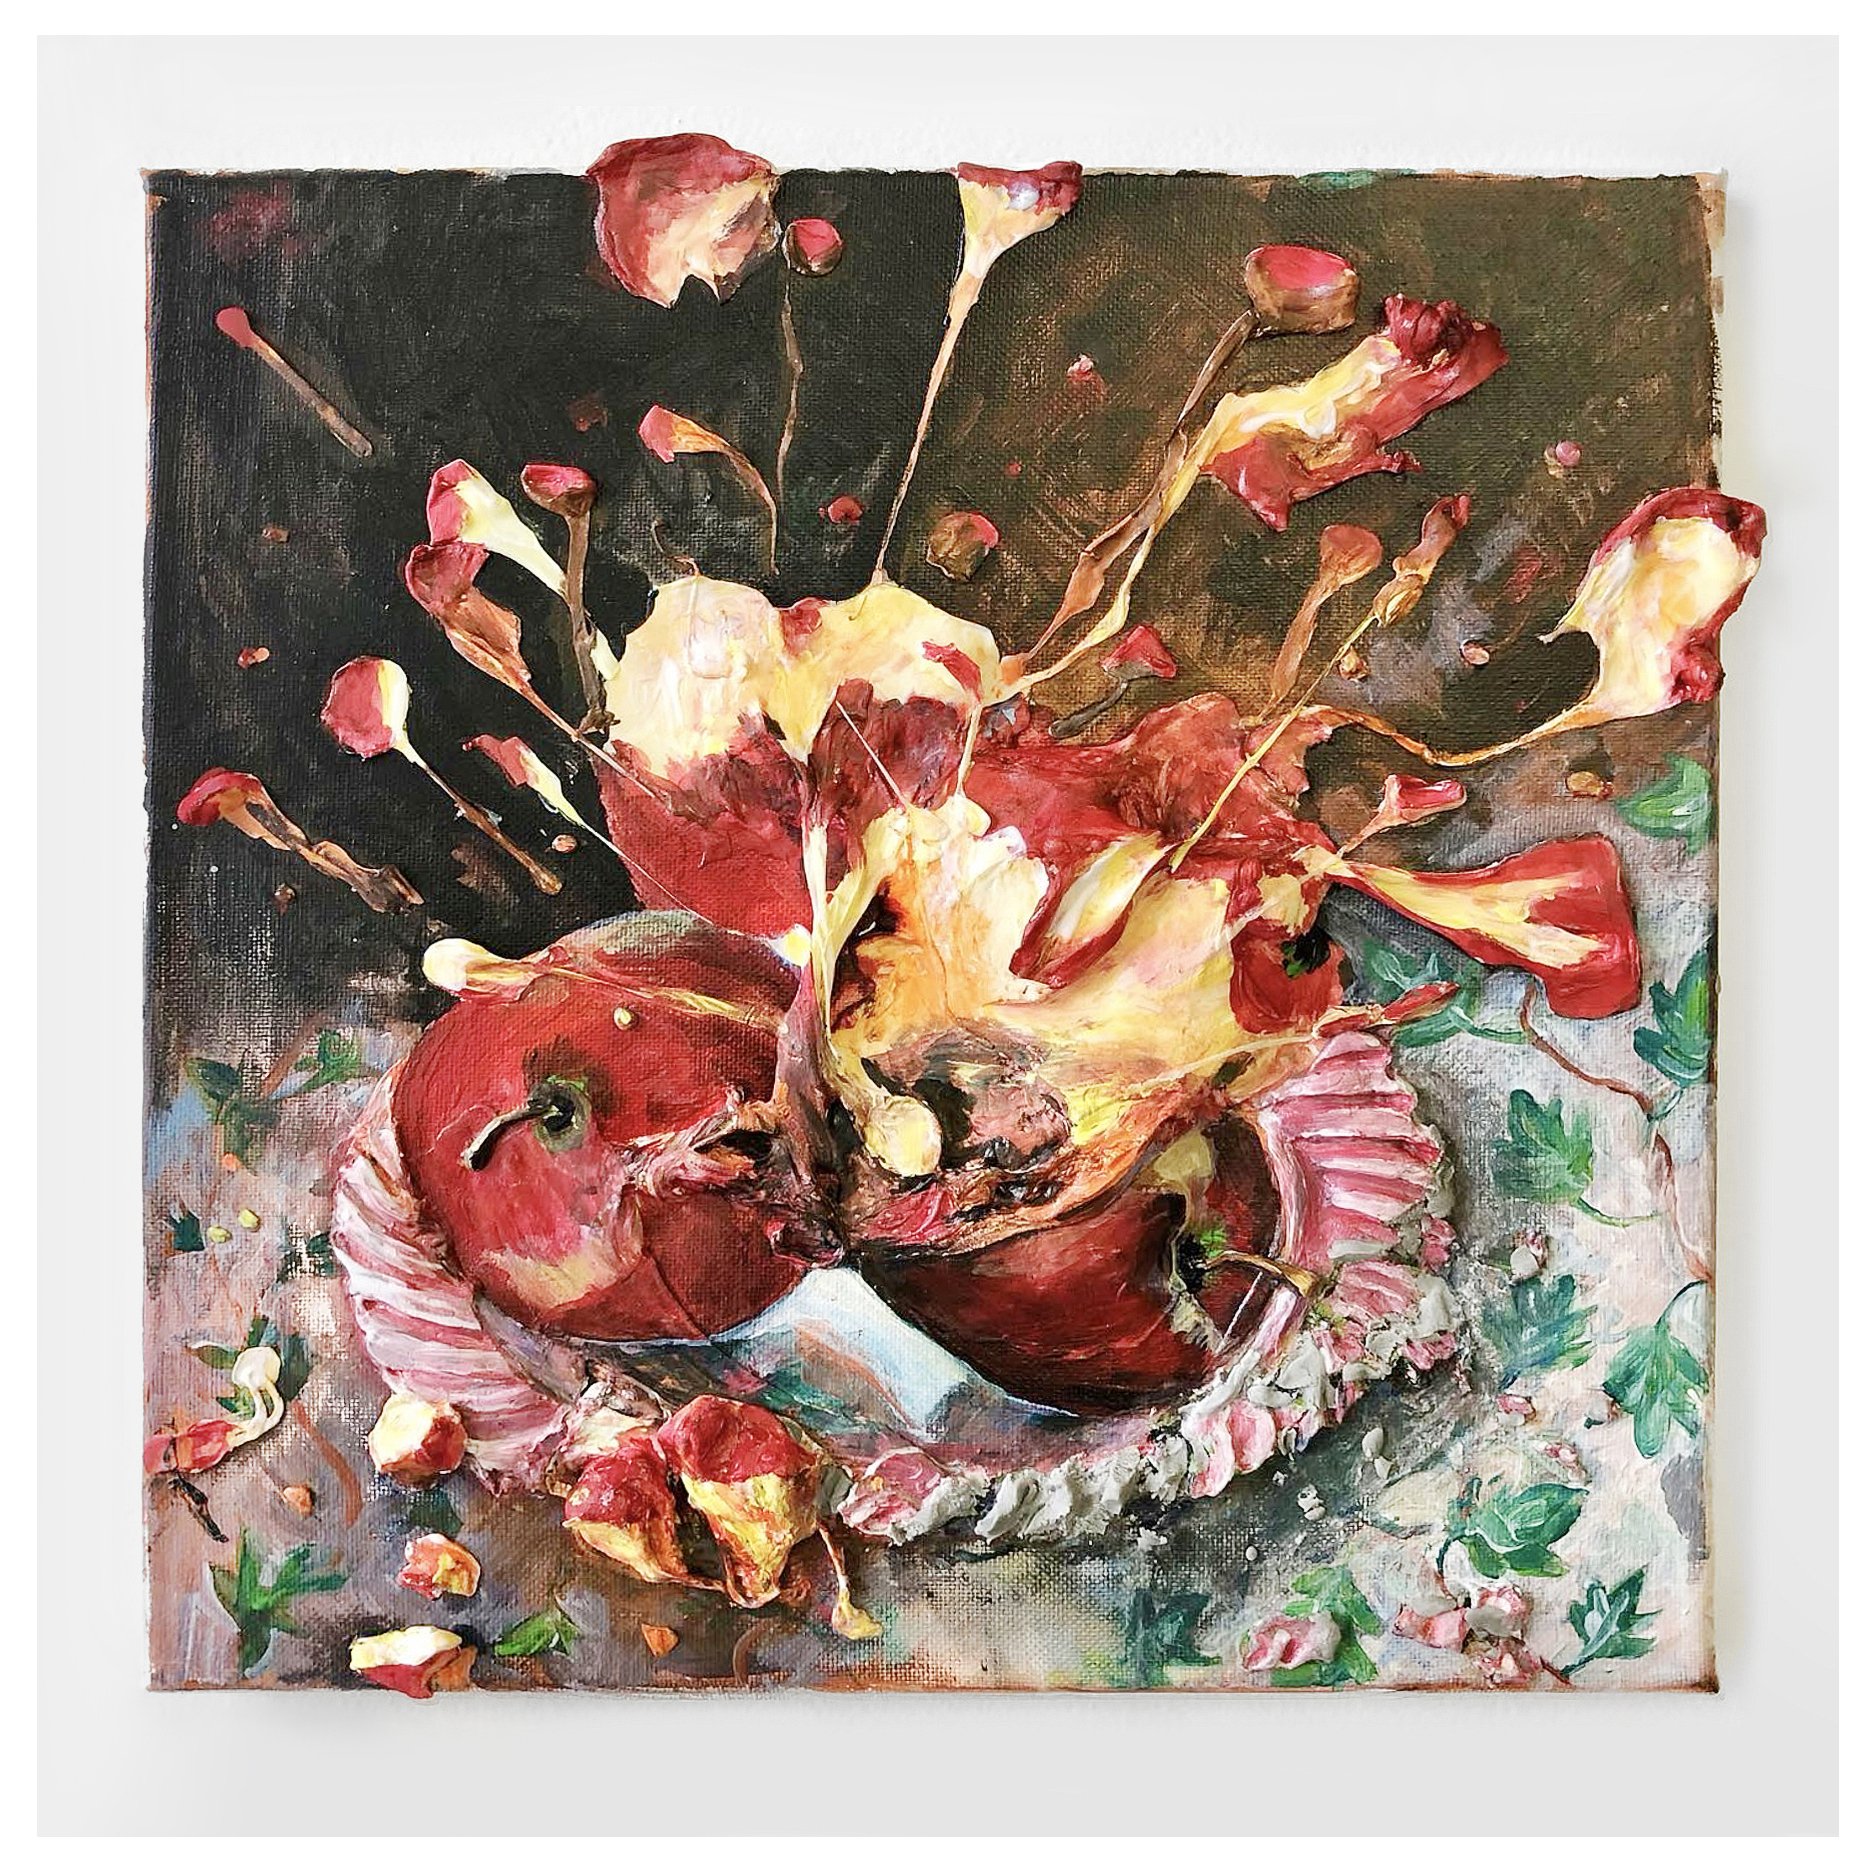 Valerie Hegarty, Exploding Apples, 2023, 12 x 12 in, foam clay, epoxy clay, acrylics, glue on canvas